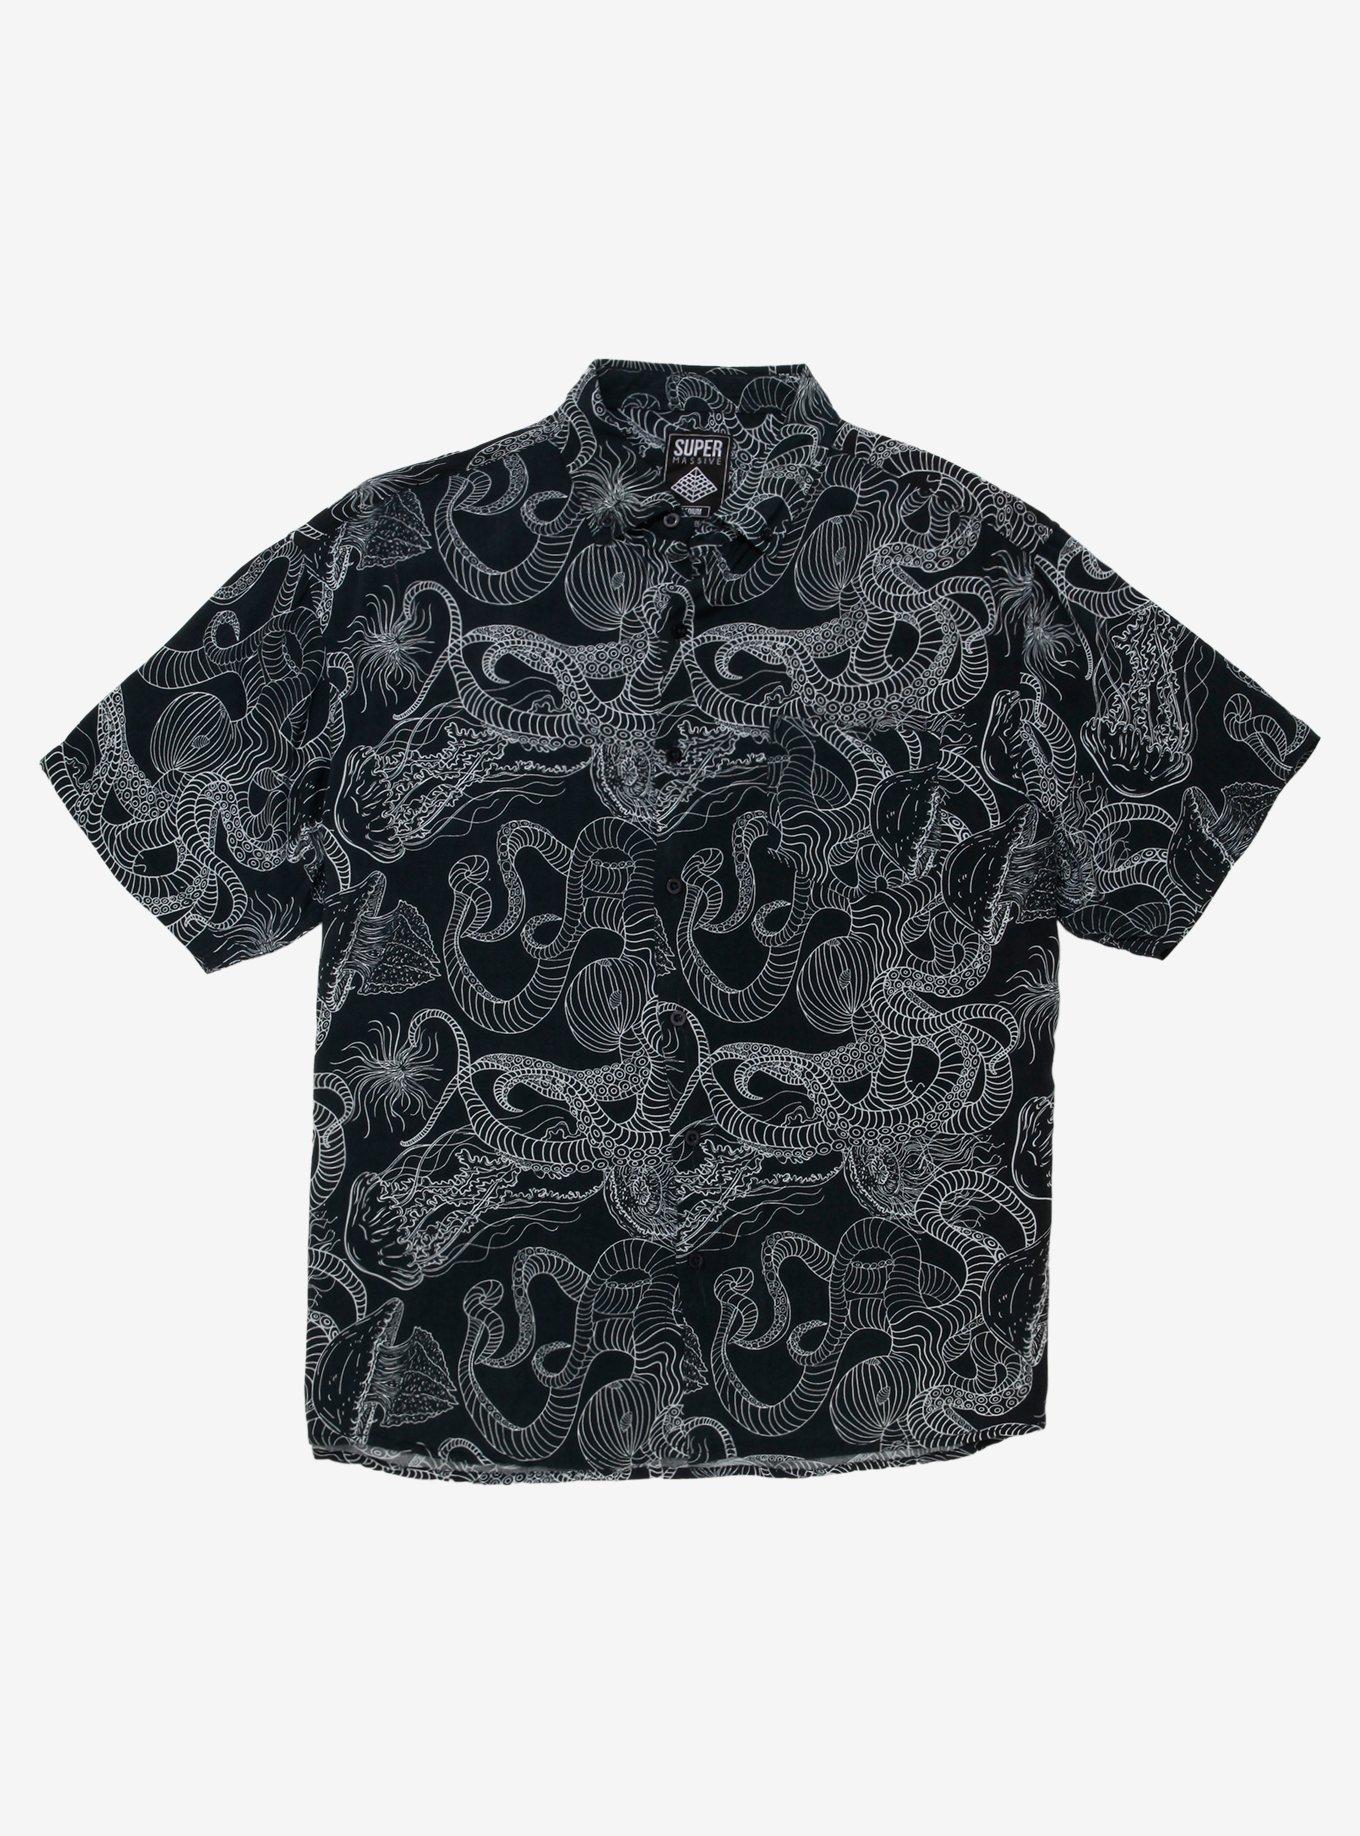 Octopus & Jellyfish Woven Button-Up, ABSTRACT, hi-res